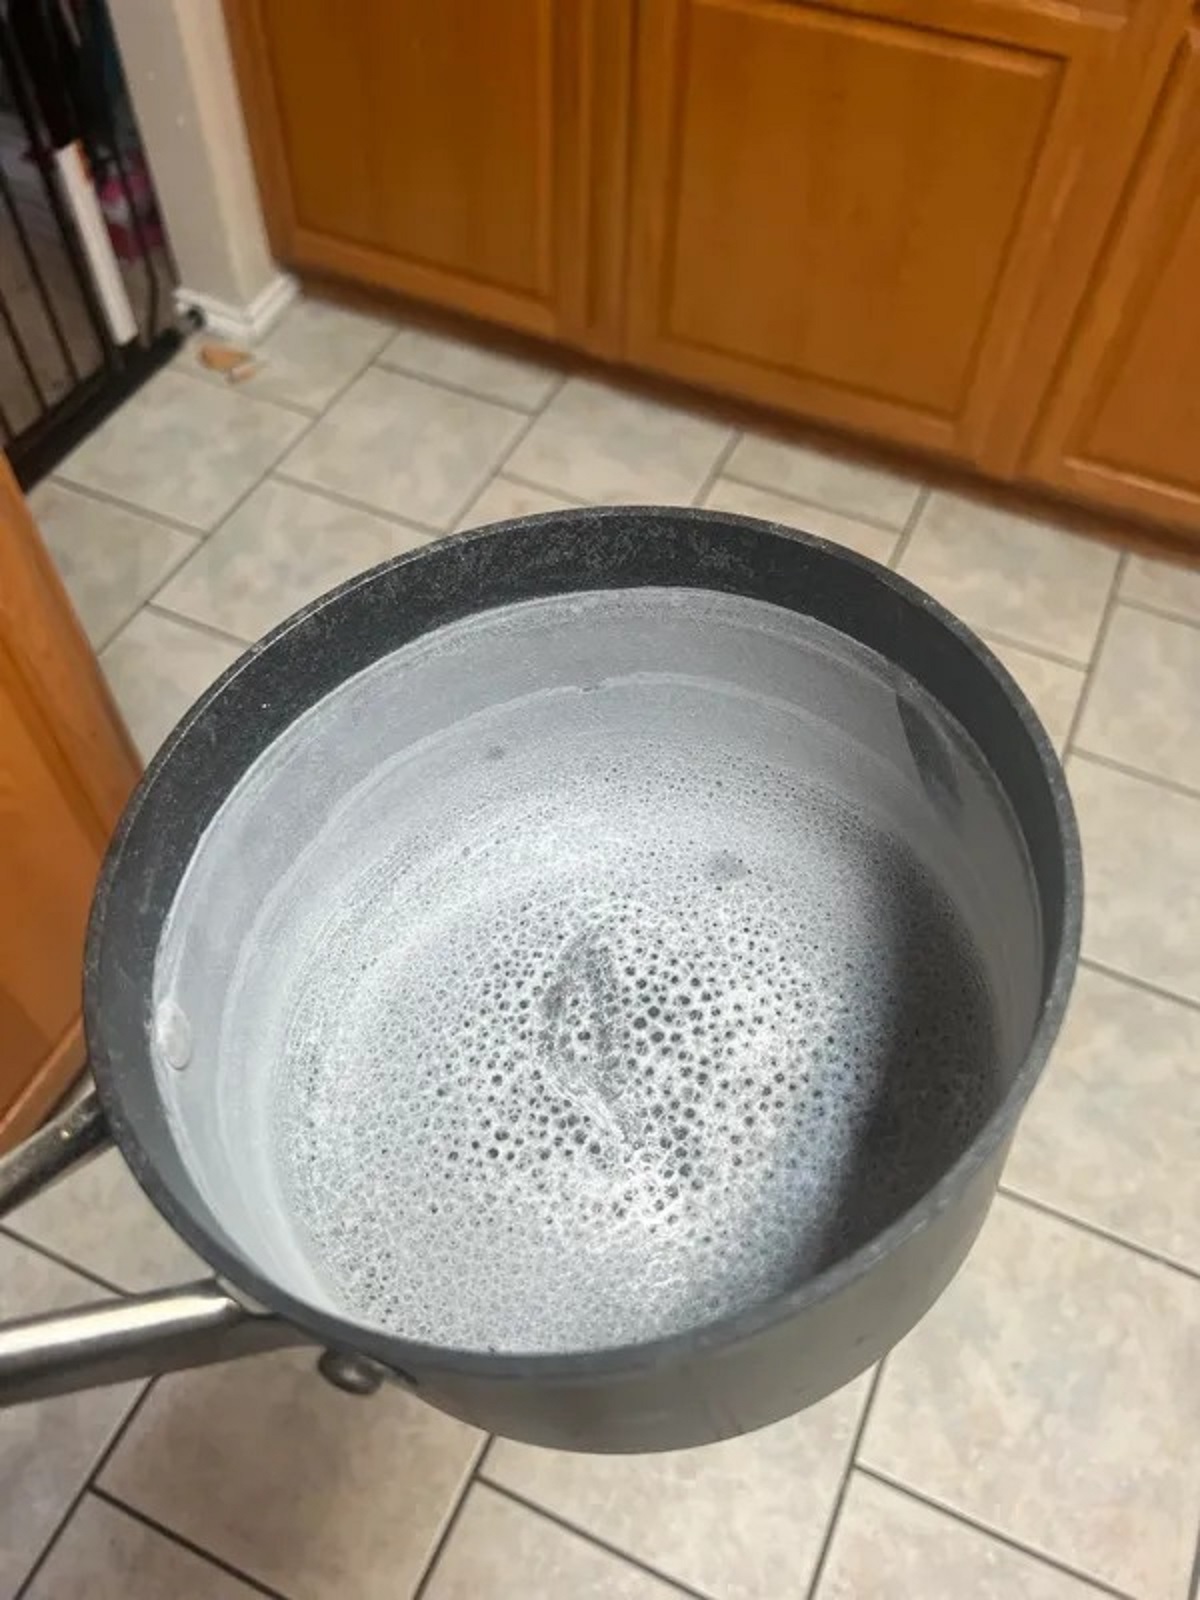 Landlord says the home we’re renting doesn’t have hard water. This is after boiling water one time.